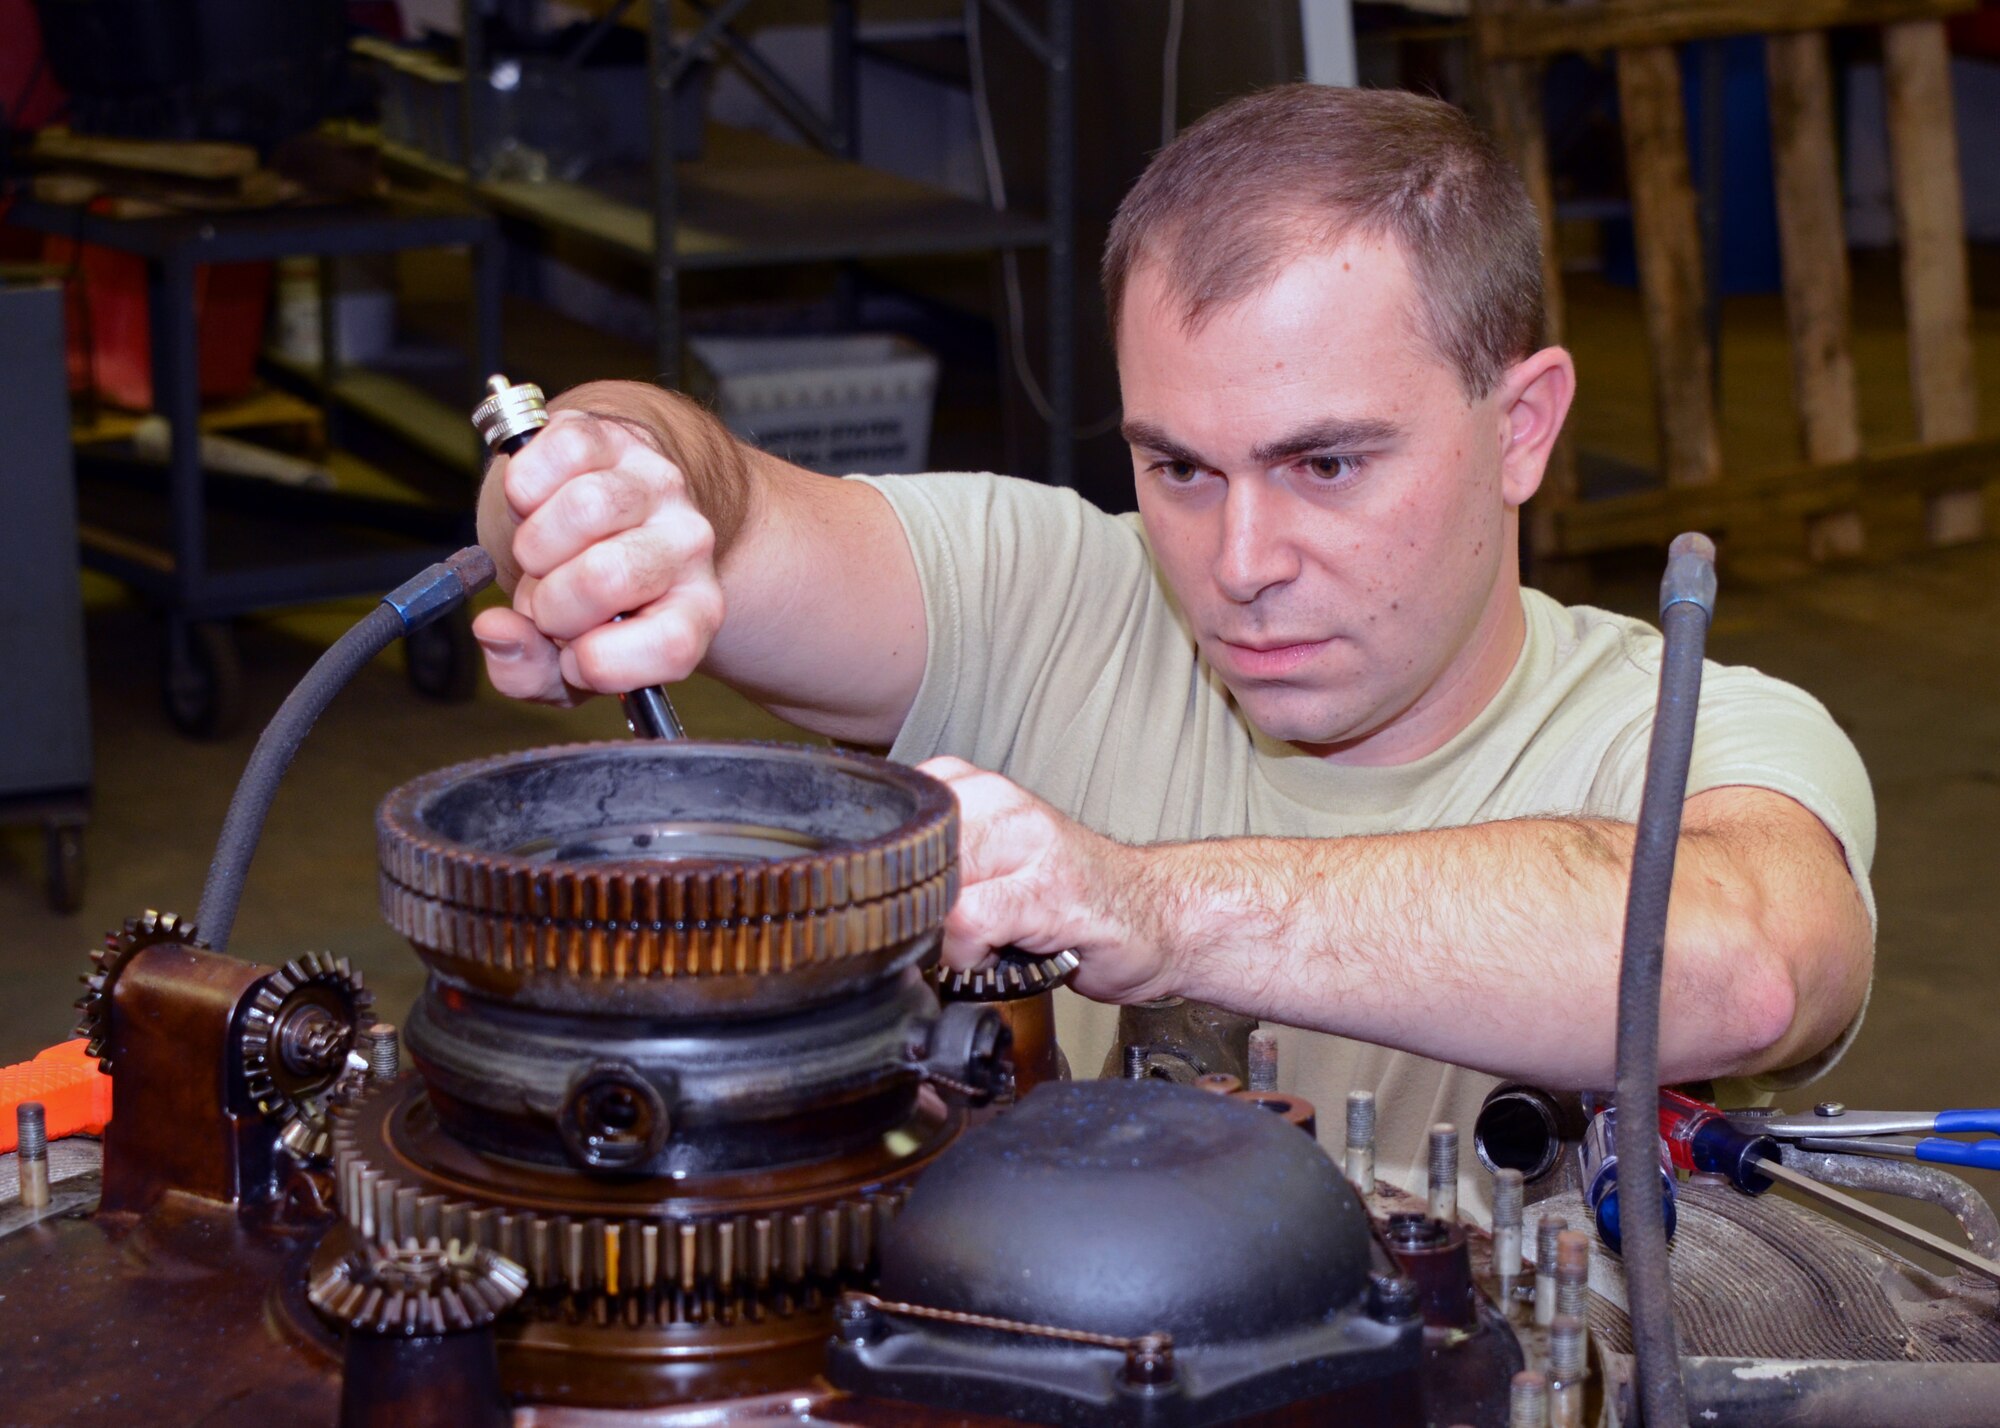 Staff Sgt. Dave Ranlet, 175th Logistic Readiness Squadron, works on an R-2800 engine previously used in World War II fighters like the P-47 Thunderbolt II and F-4U Corsair on November 15th. When the engine is fully restored, it will be on display in the Glenn L. Martin Maryland Aviation Museum in Baltimore. Ranlet volunteers his time rebuilding engines for the museum. (U.S. Air National Guard photo by Tech. Sgt. David Speicher/RELEASED)